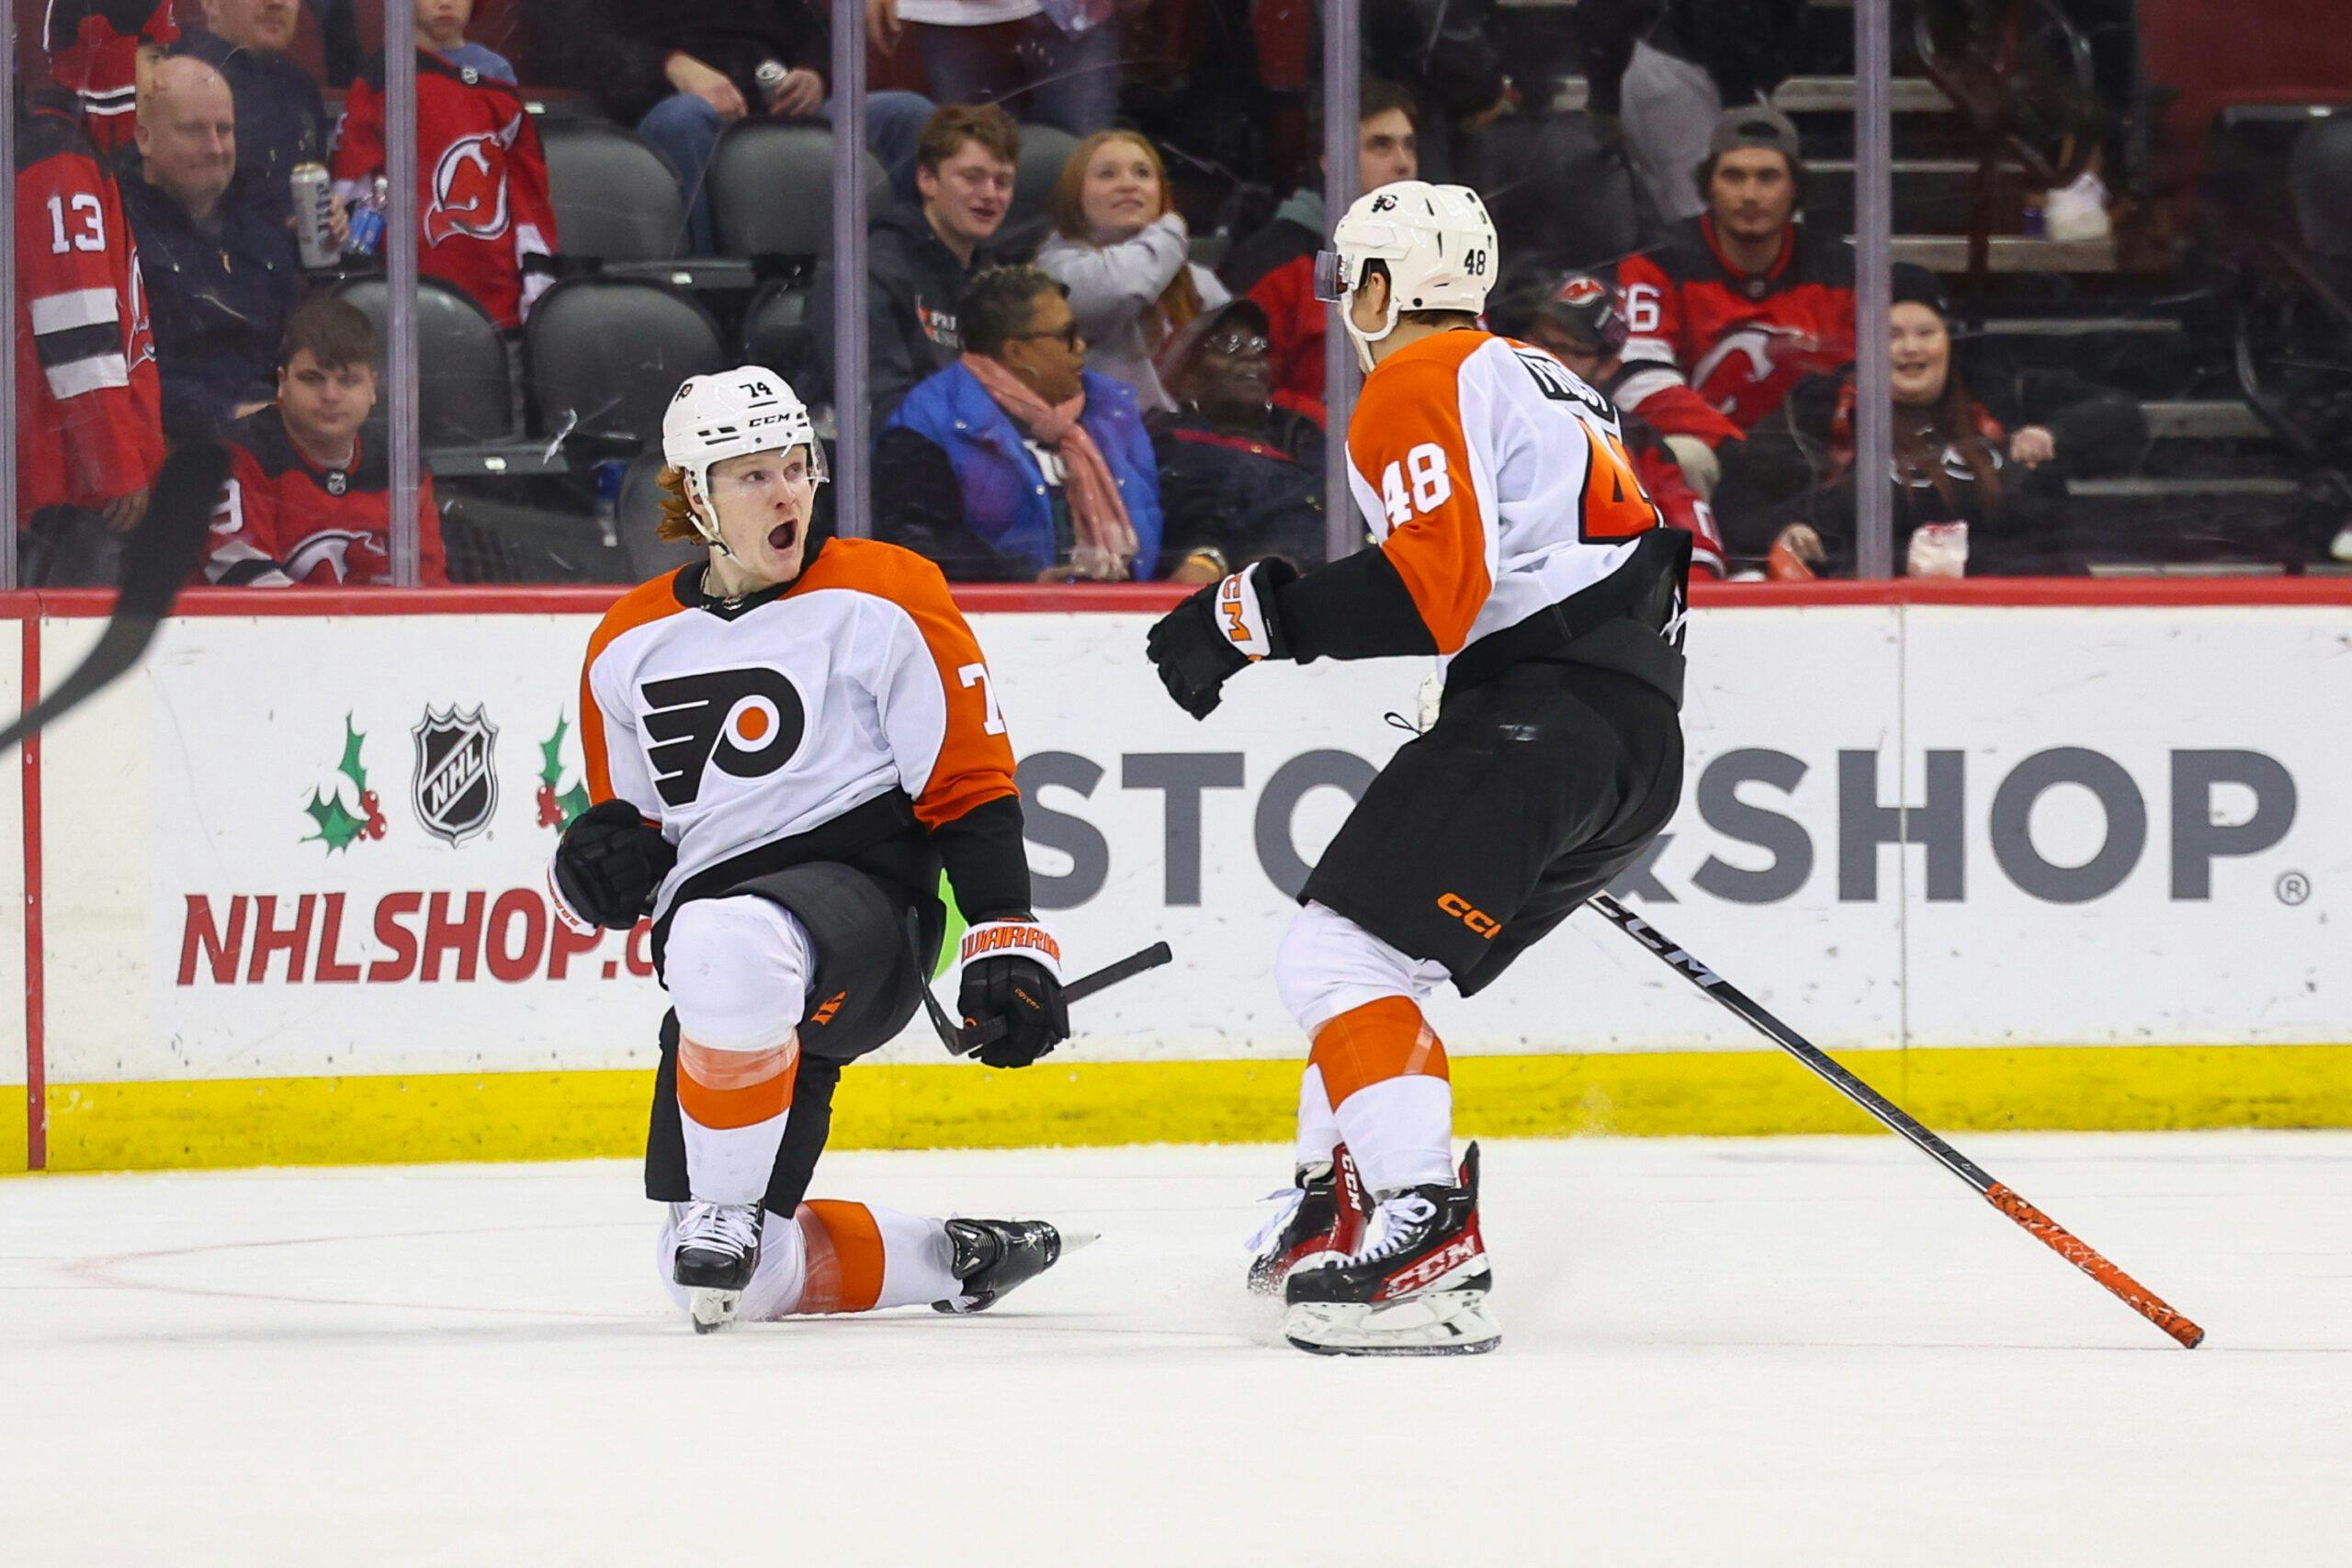 Believe it or not, winning is good for the Flyers’ rebuild